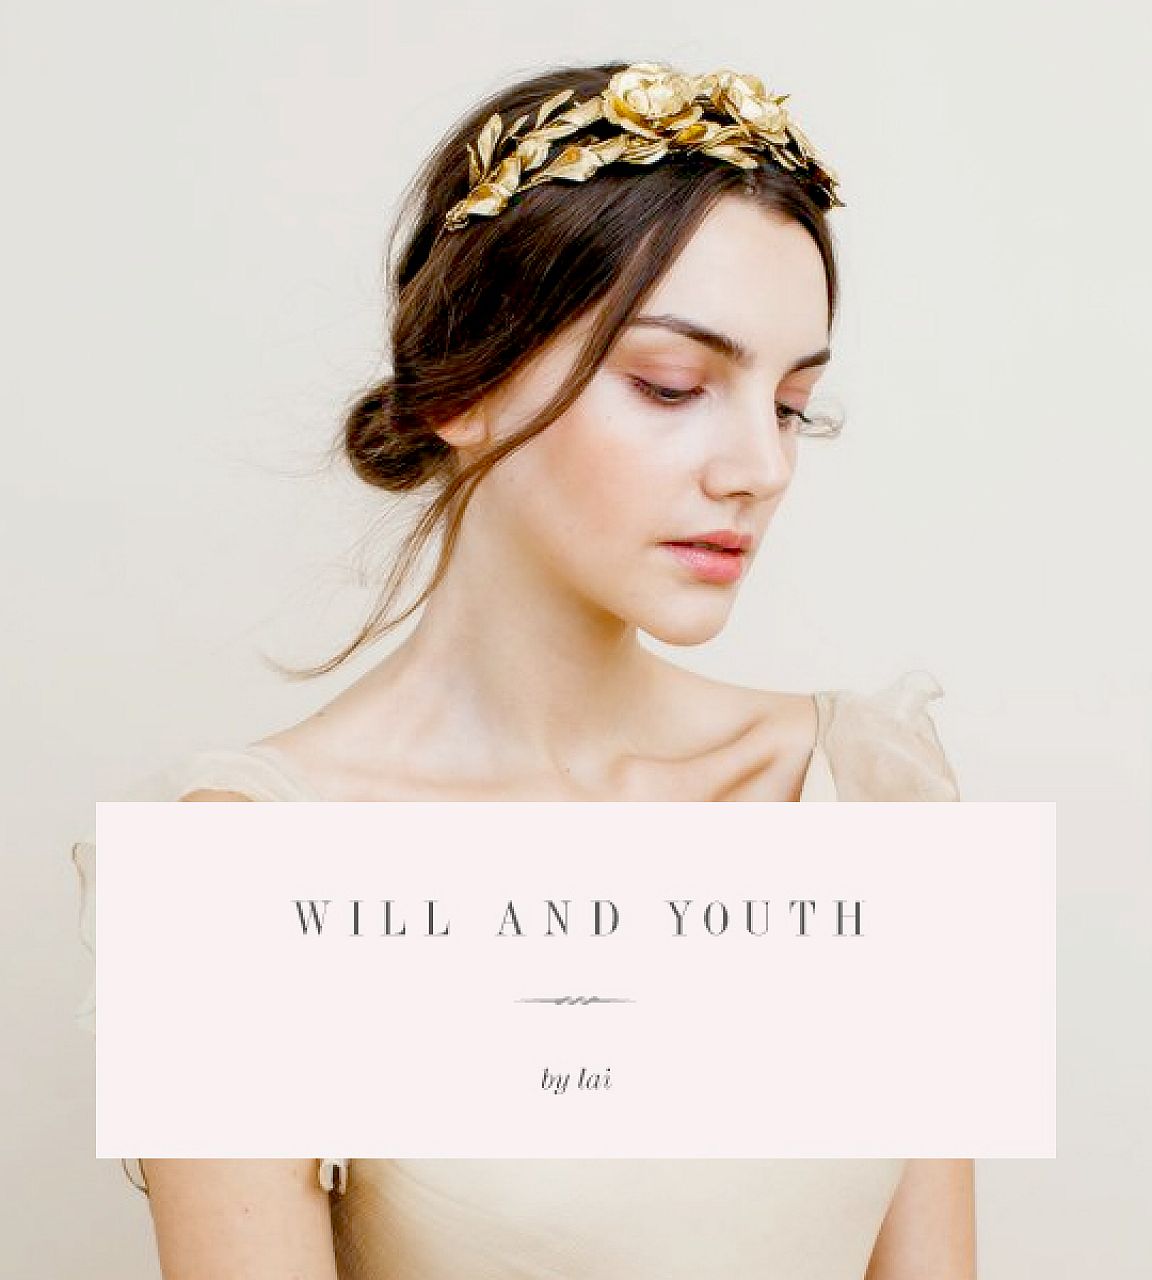 Will and Youth